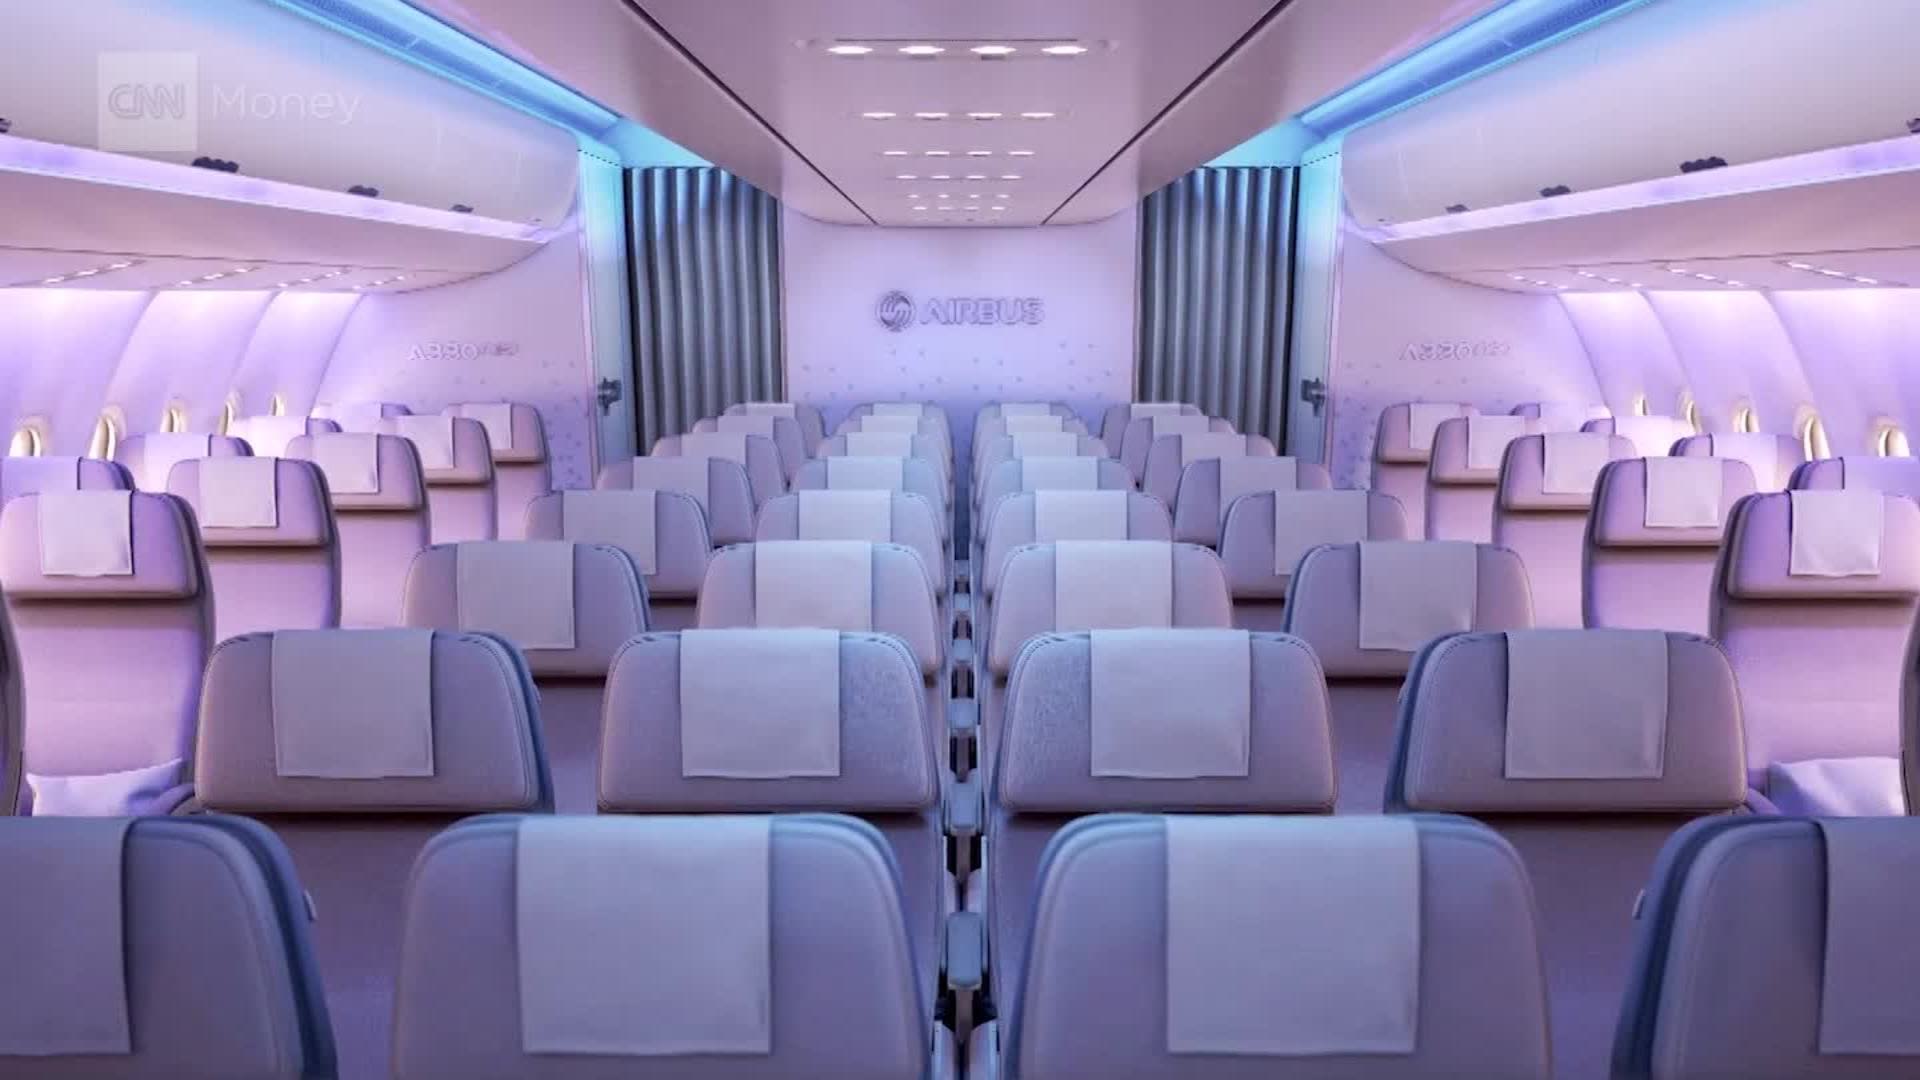 The new aircraft, routes and airplane cabins taking off in 2023